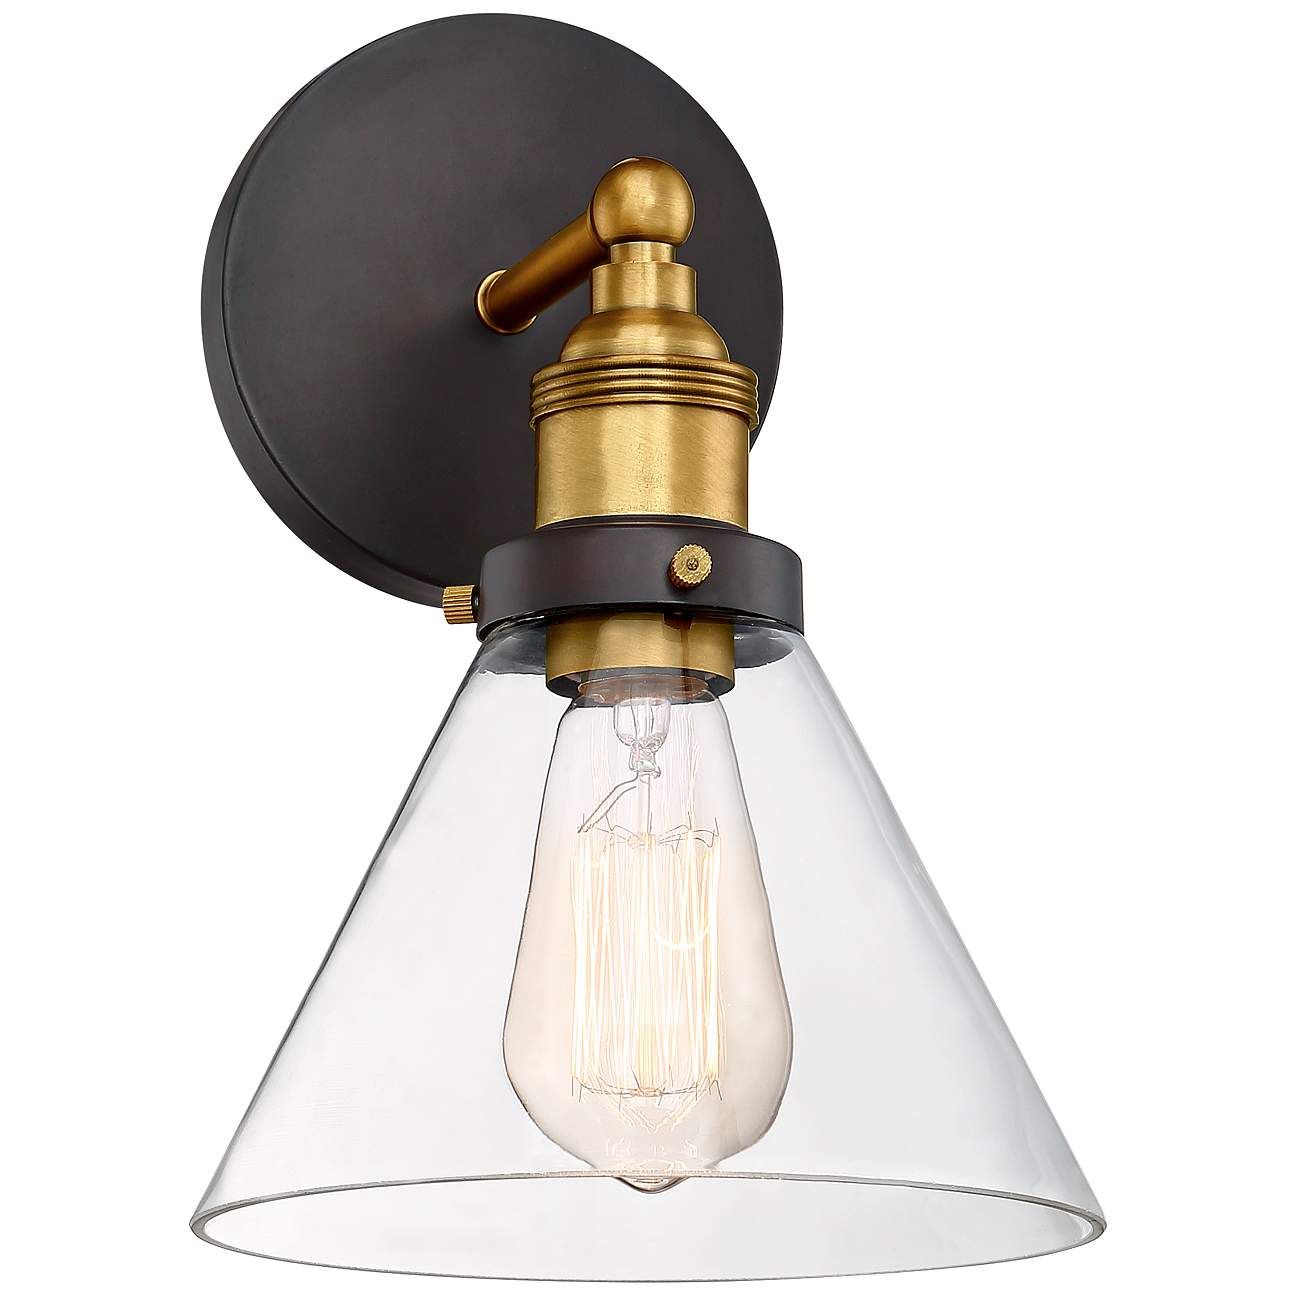 Burke 10 3/4" High Bronze and Warm Brass LED Wall Sconce | LampsPlus.com